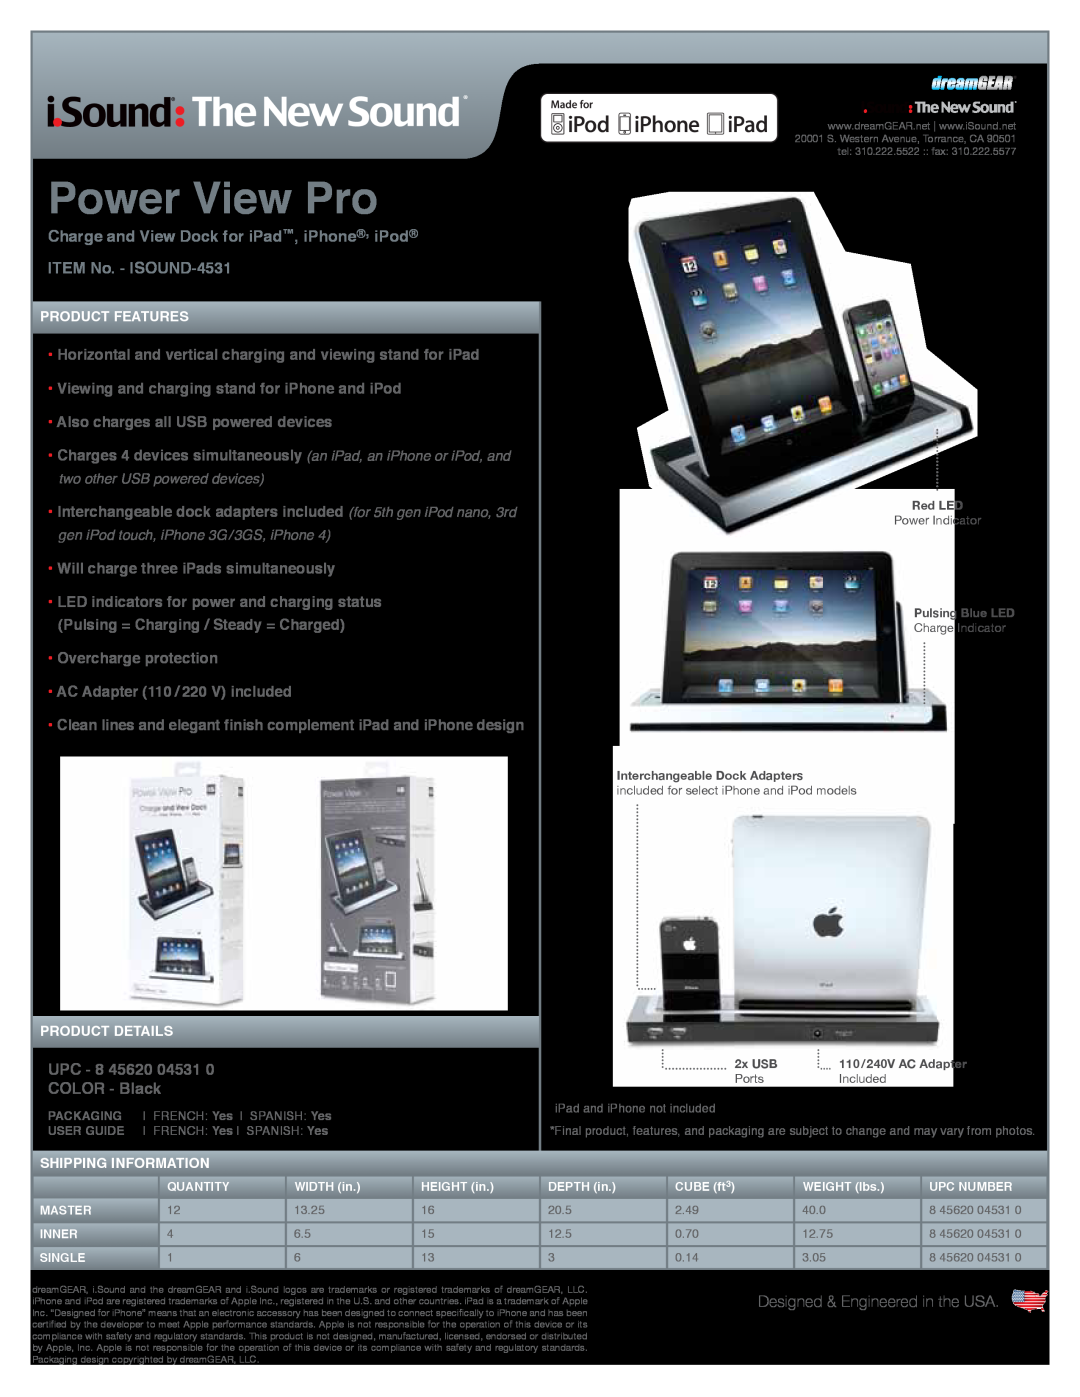 DreamGEAR manual Power View Pro, Charge and View Dock for iPad, iPhone, iPod ITEM No. - ISOUND-4531, Product Features 